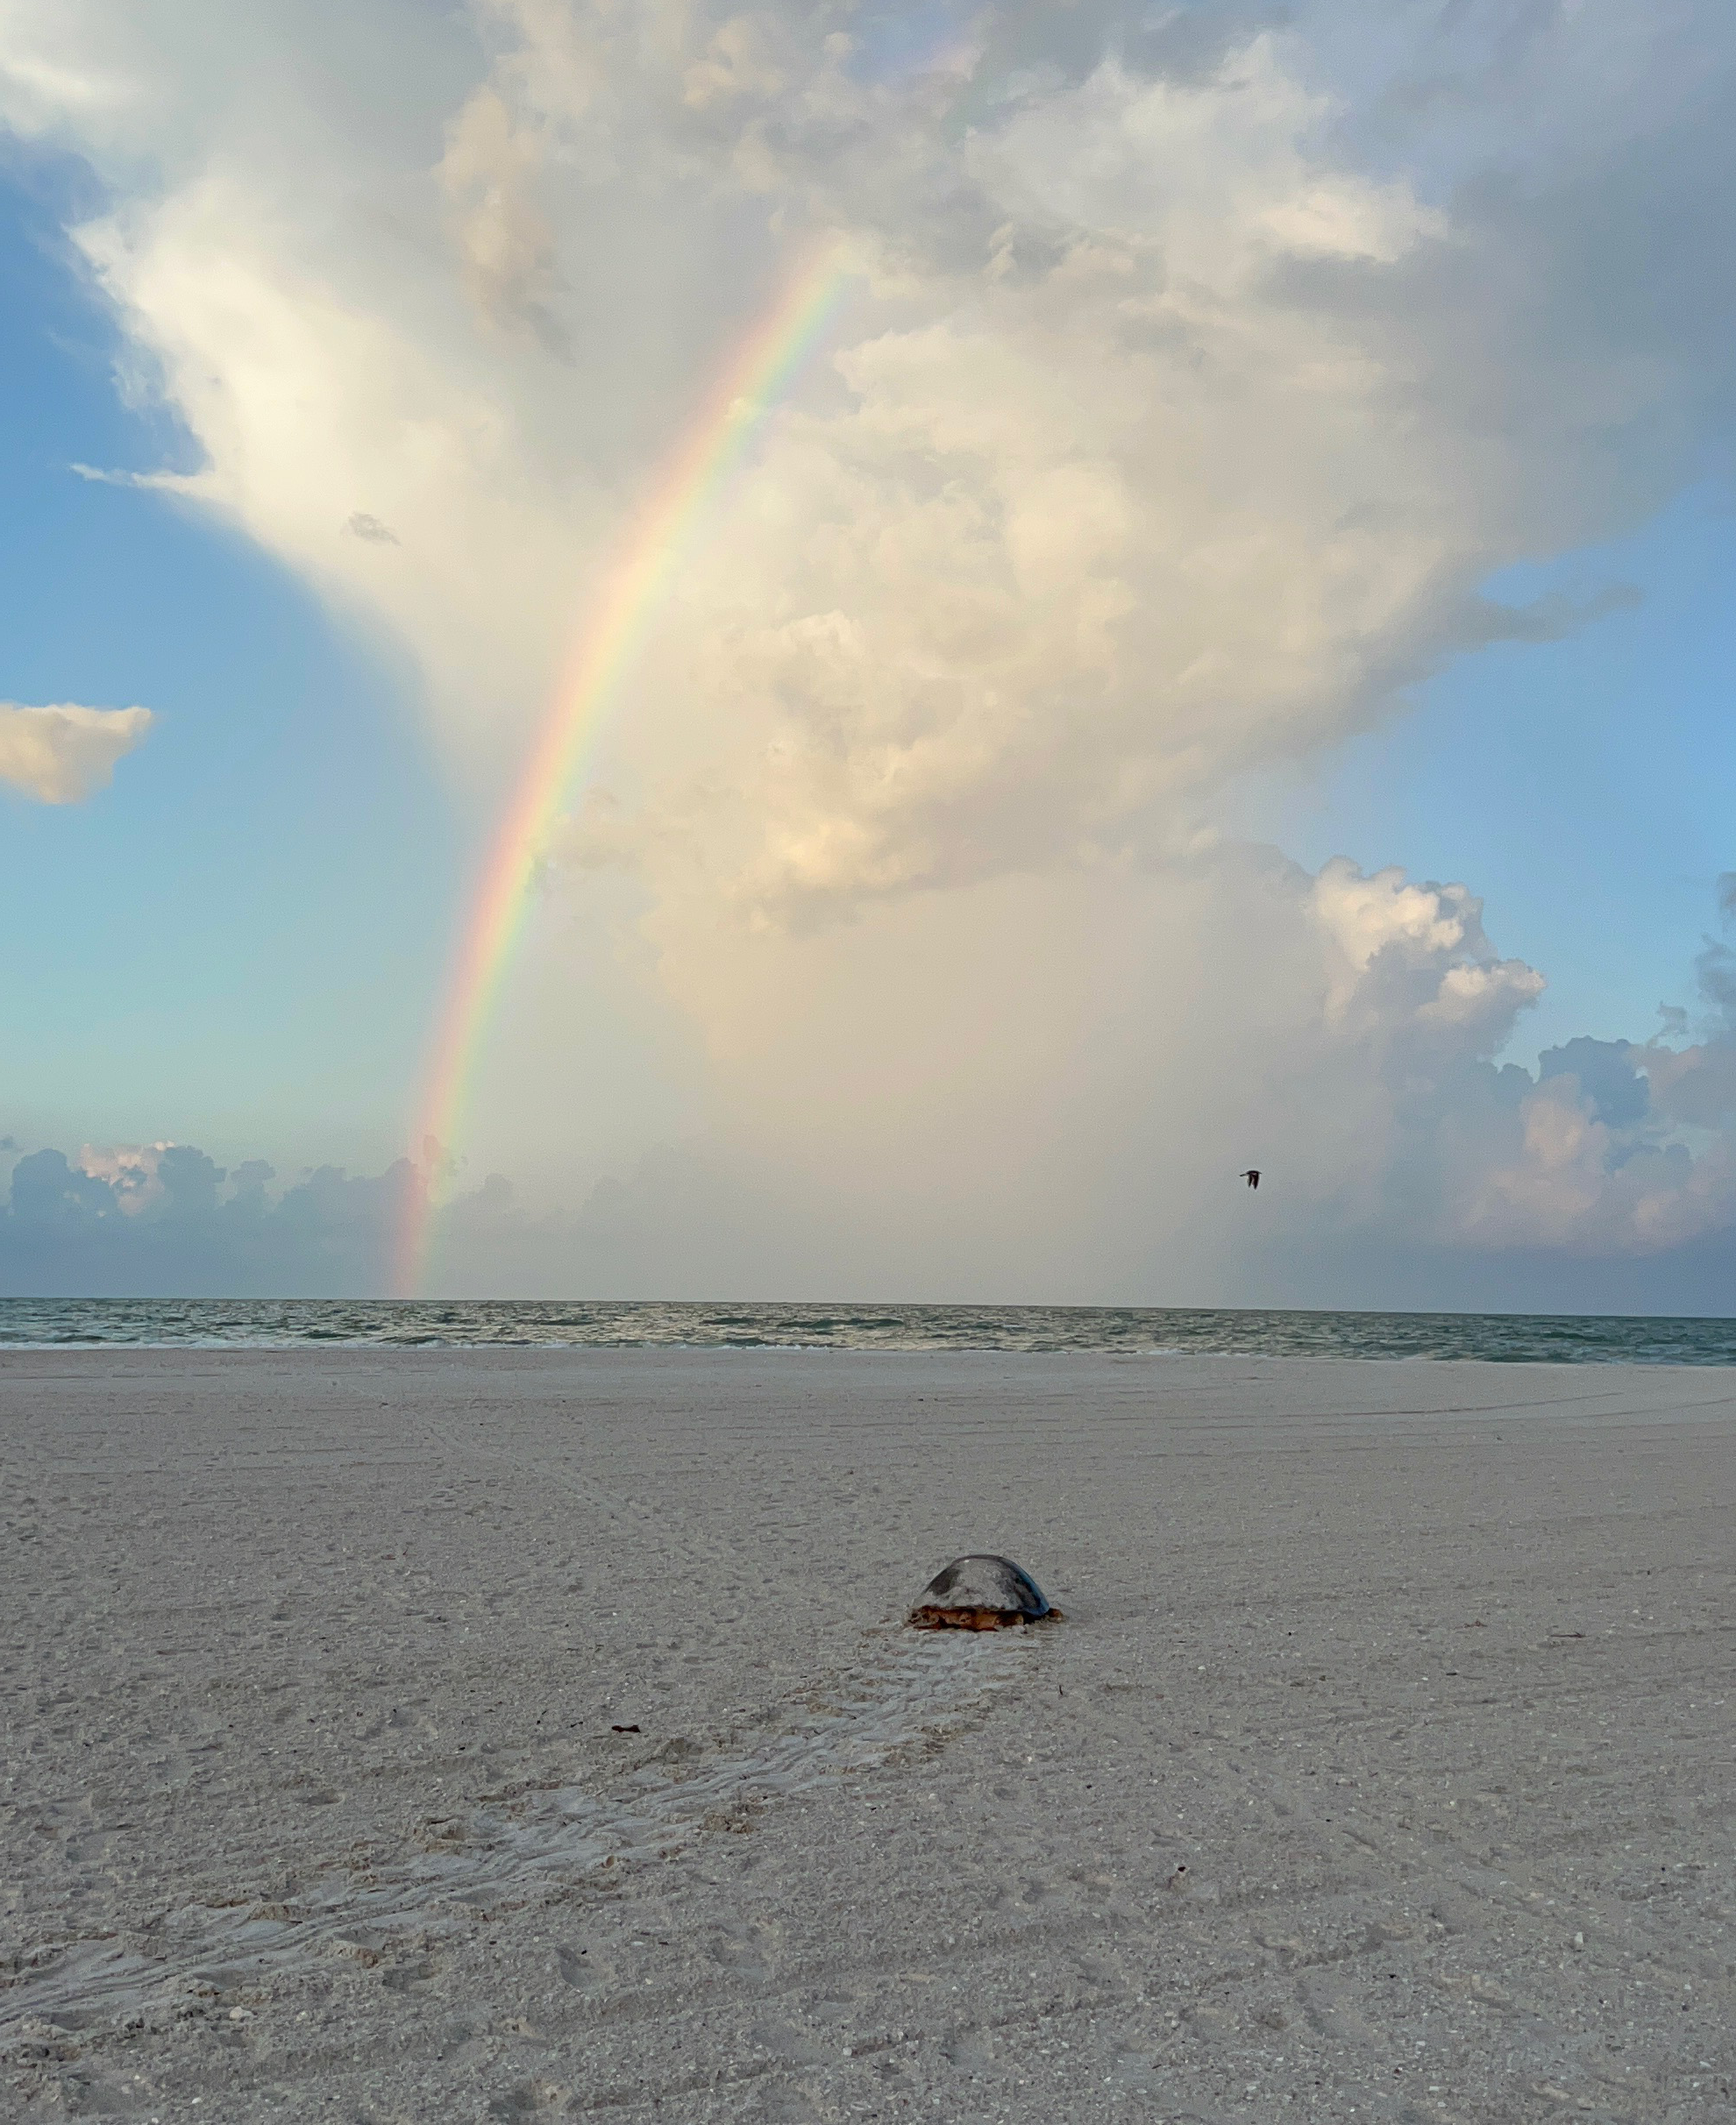 Small sea turtle heading towards the water under a rainbow